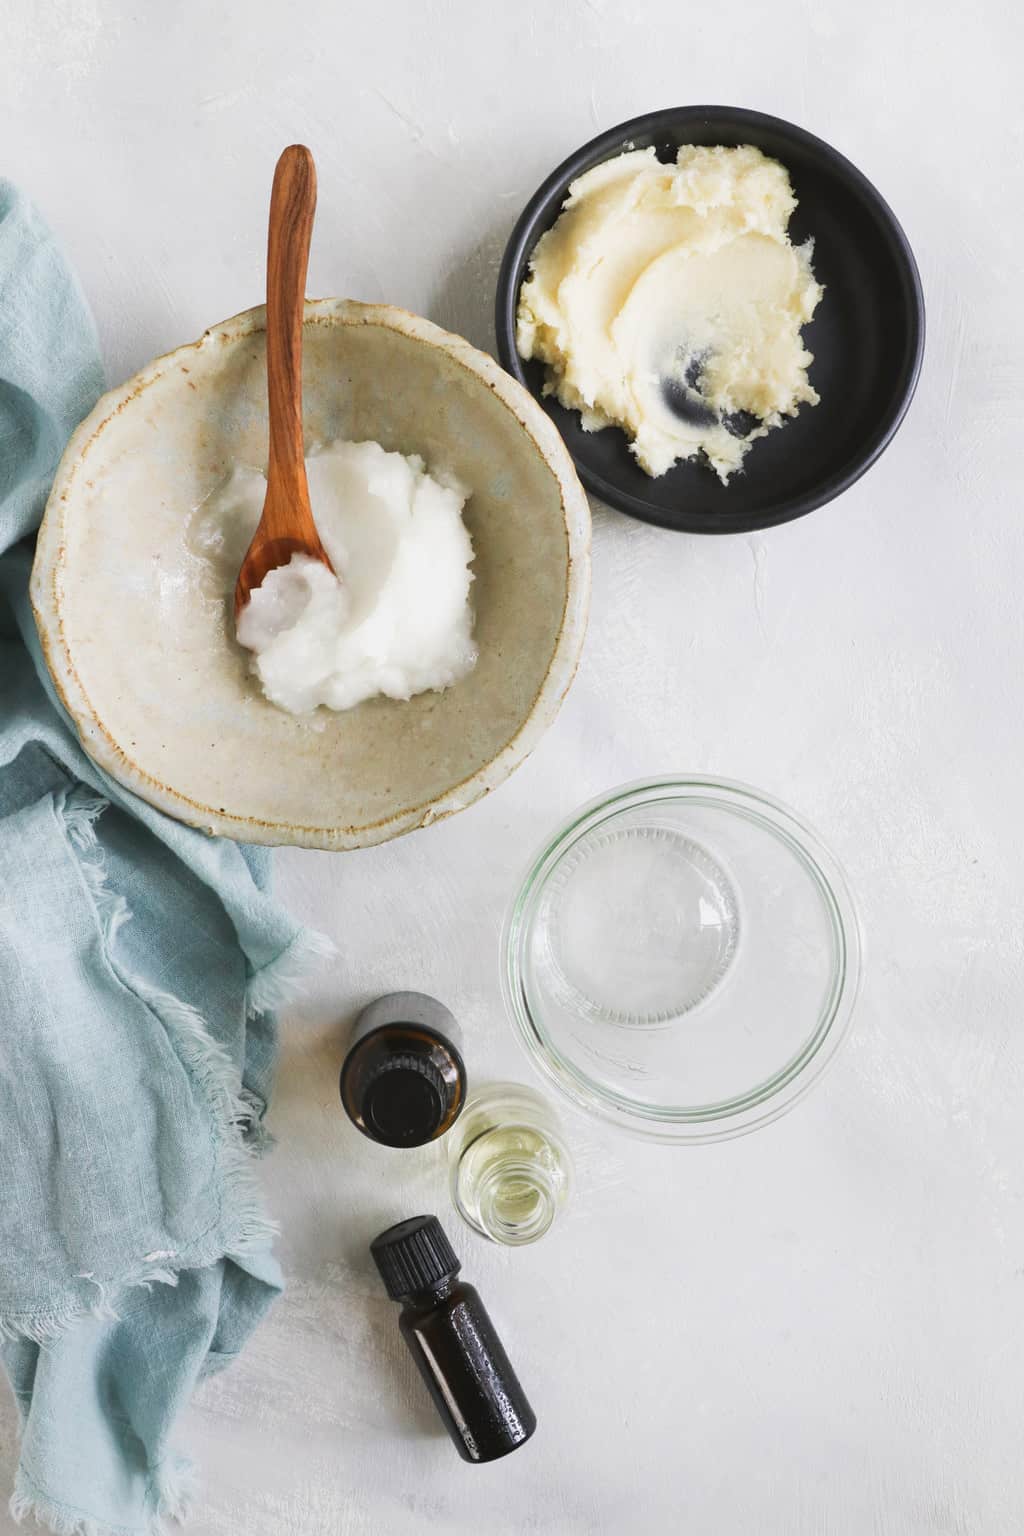 Ingredients for homemade body butter recipes